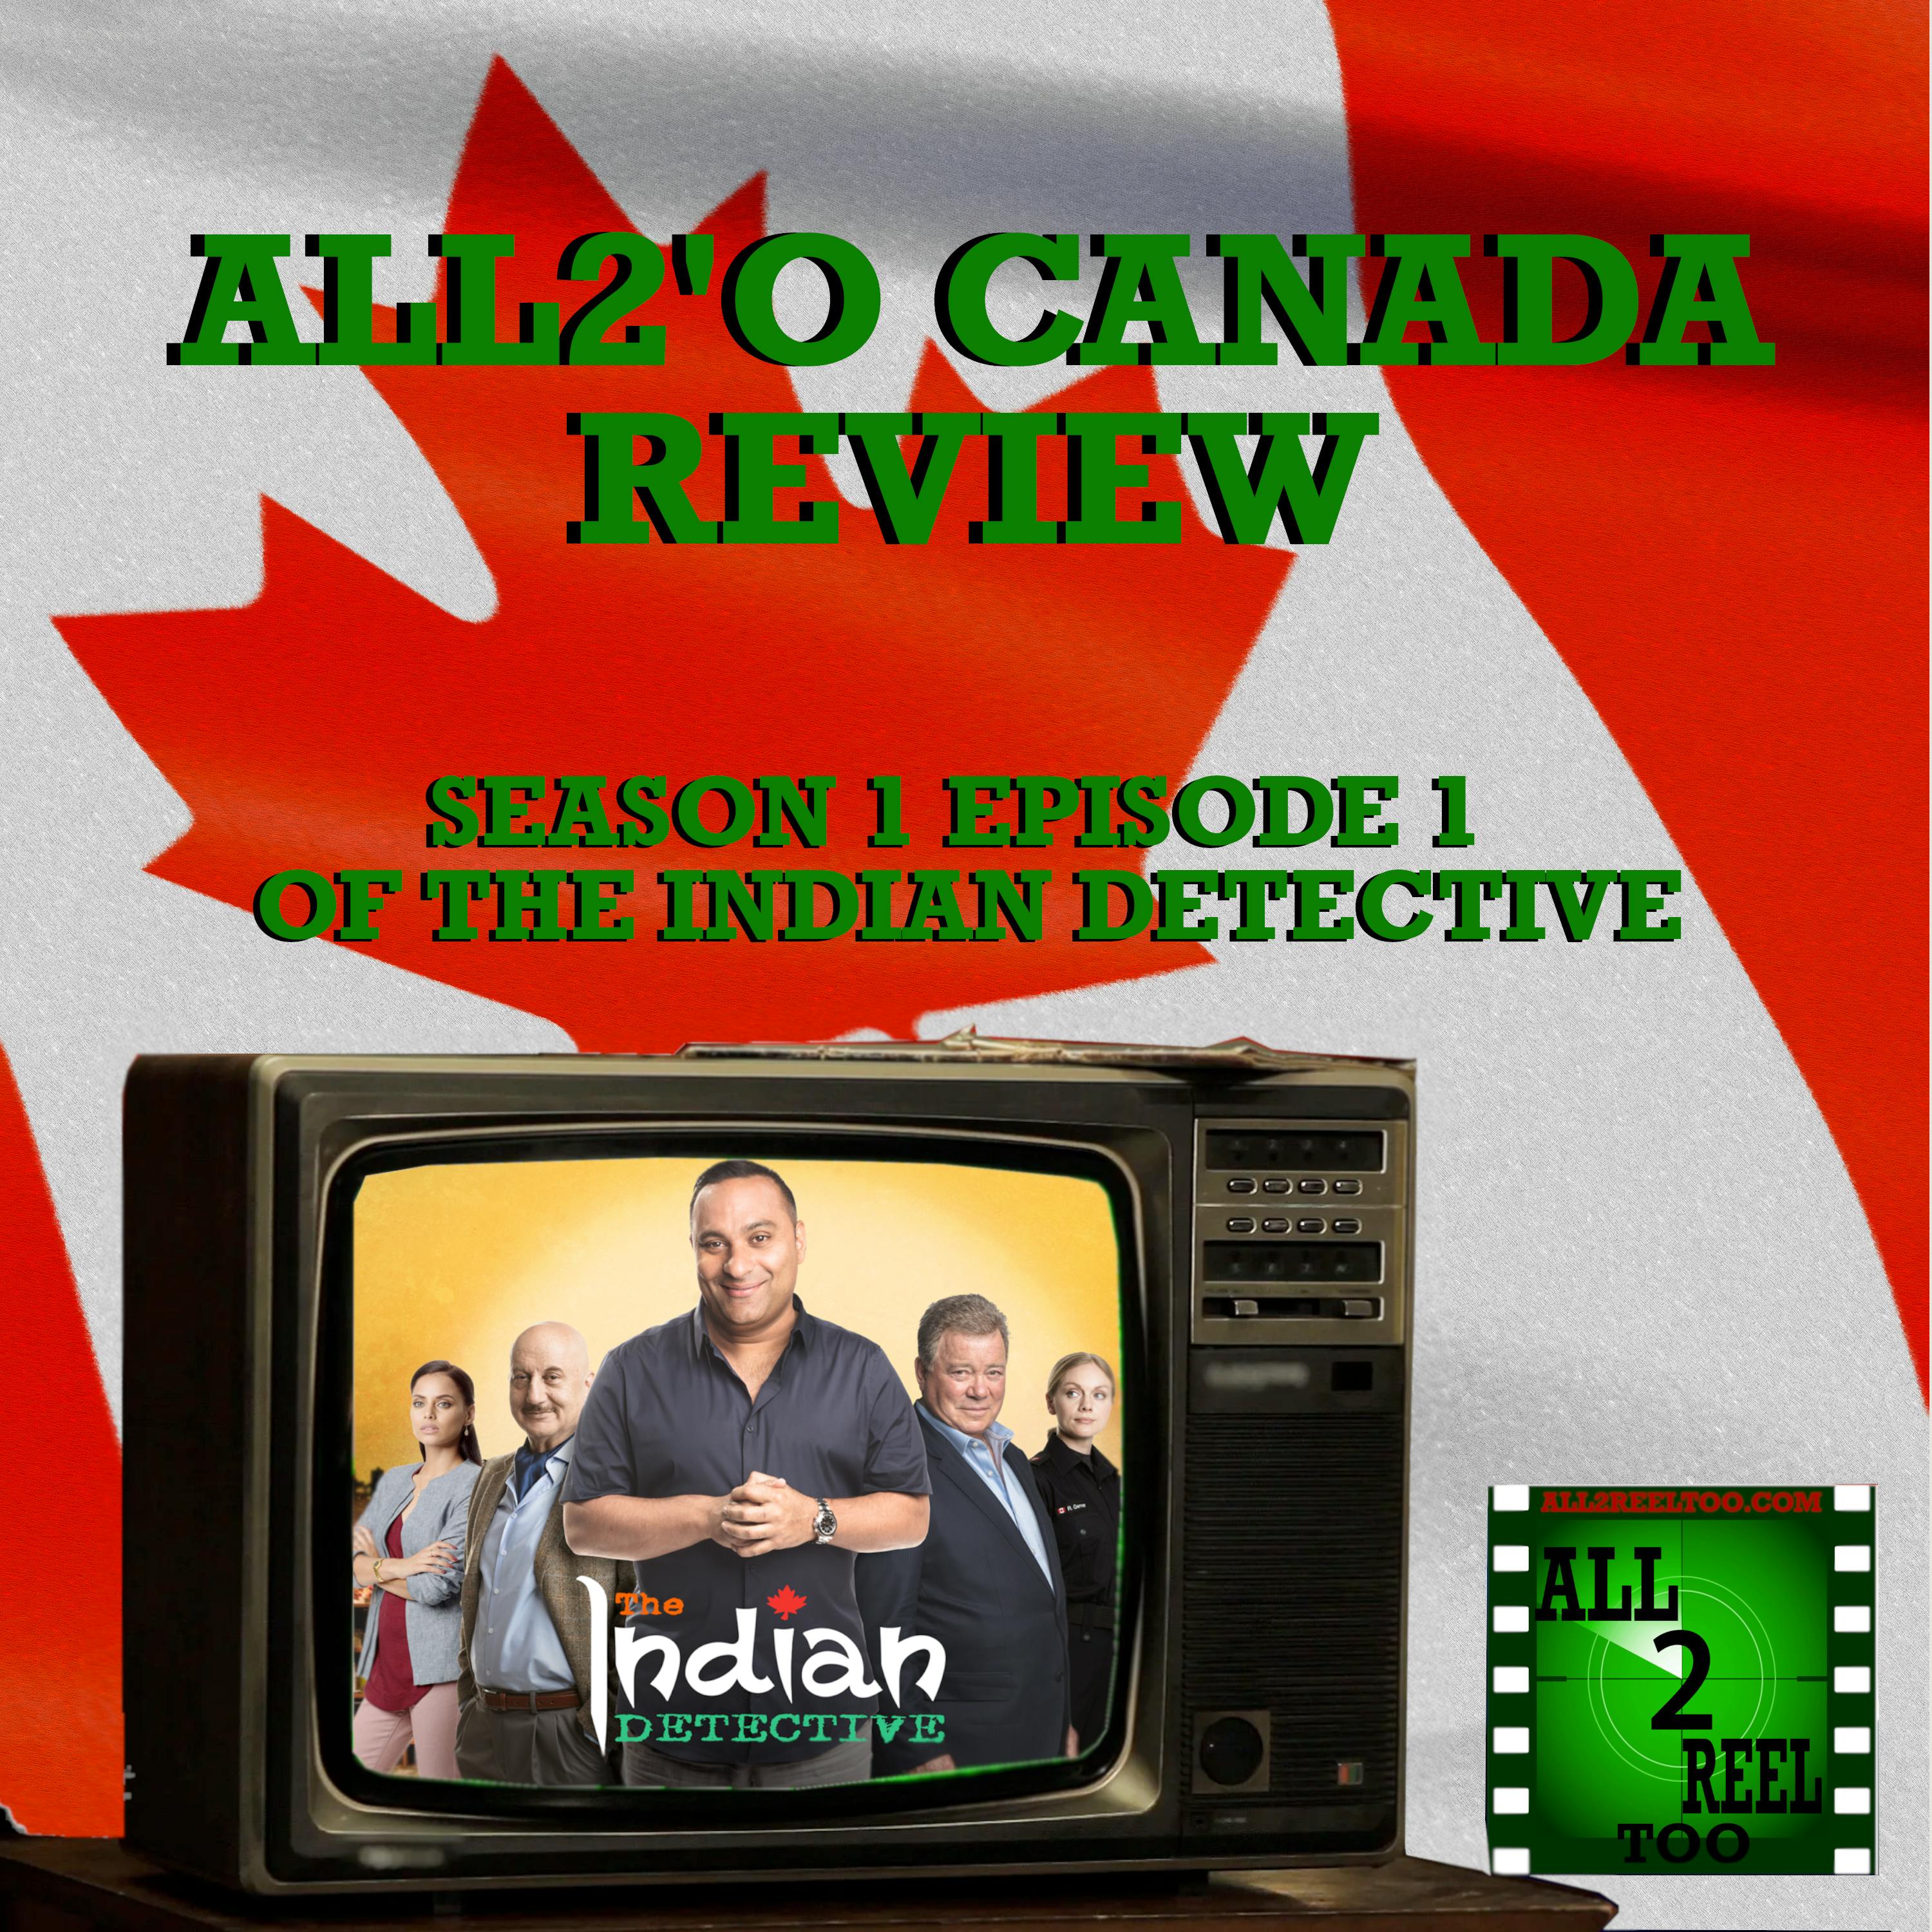 The Indian Detective (2017) S1EP1- All2’O CANADA Review